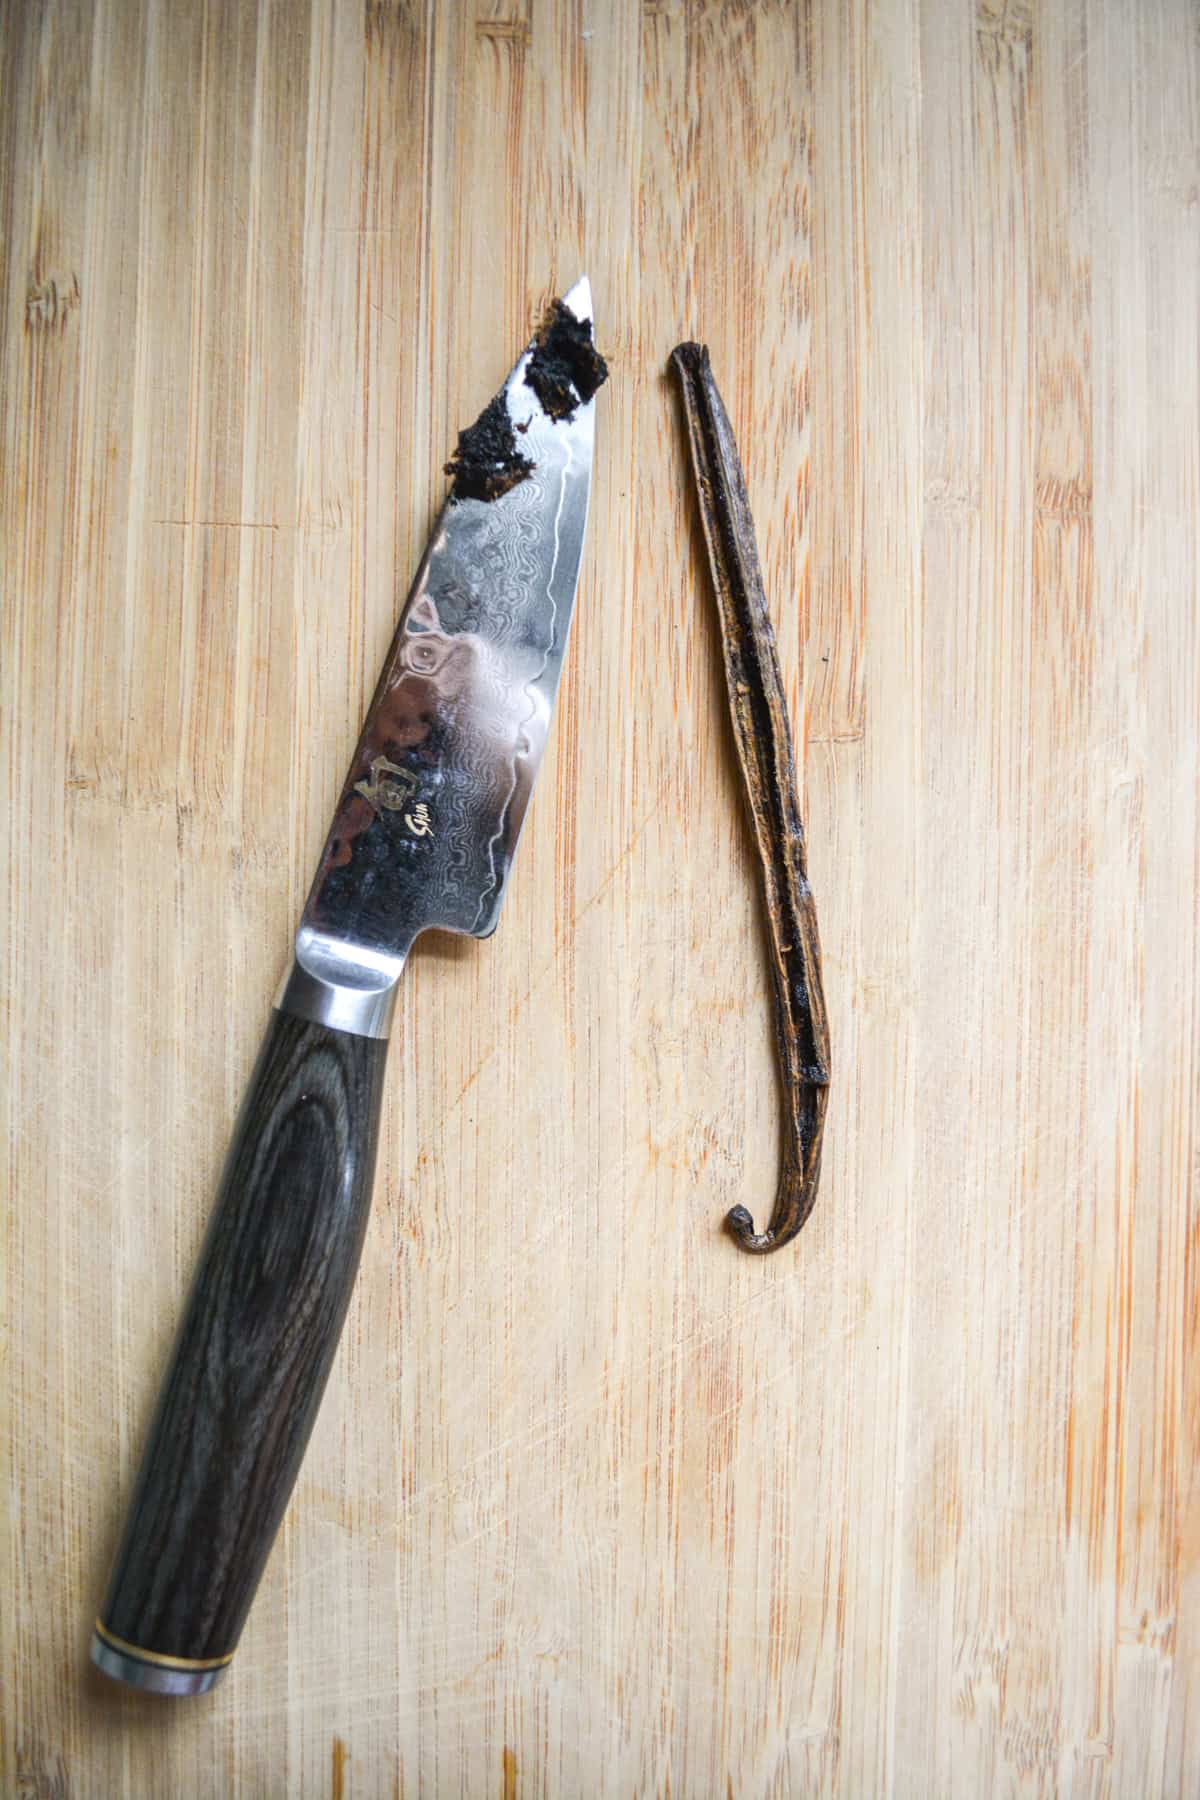 Sliced open vanilla bean on a cutting board next to a paring knife with the vanilla caviar on it.